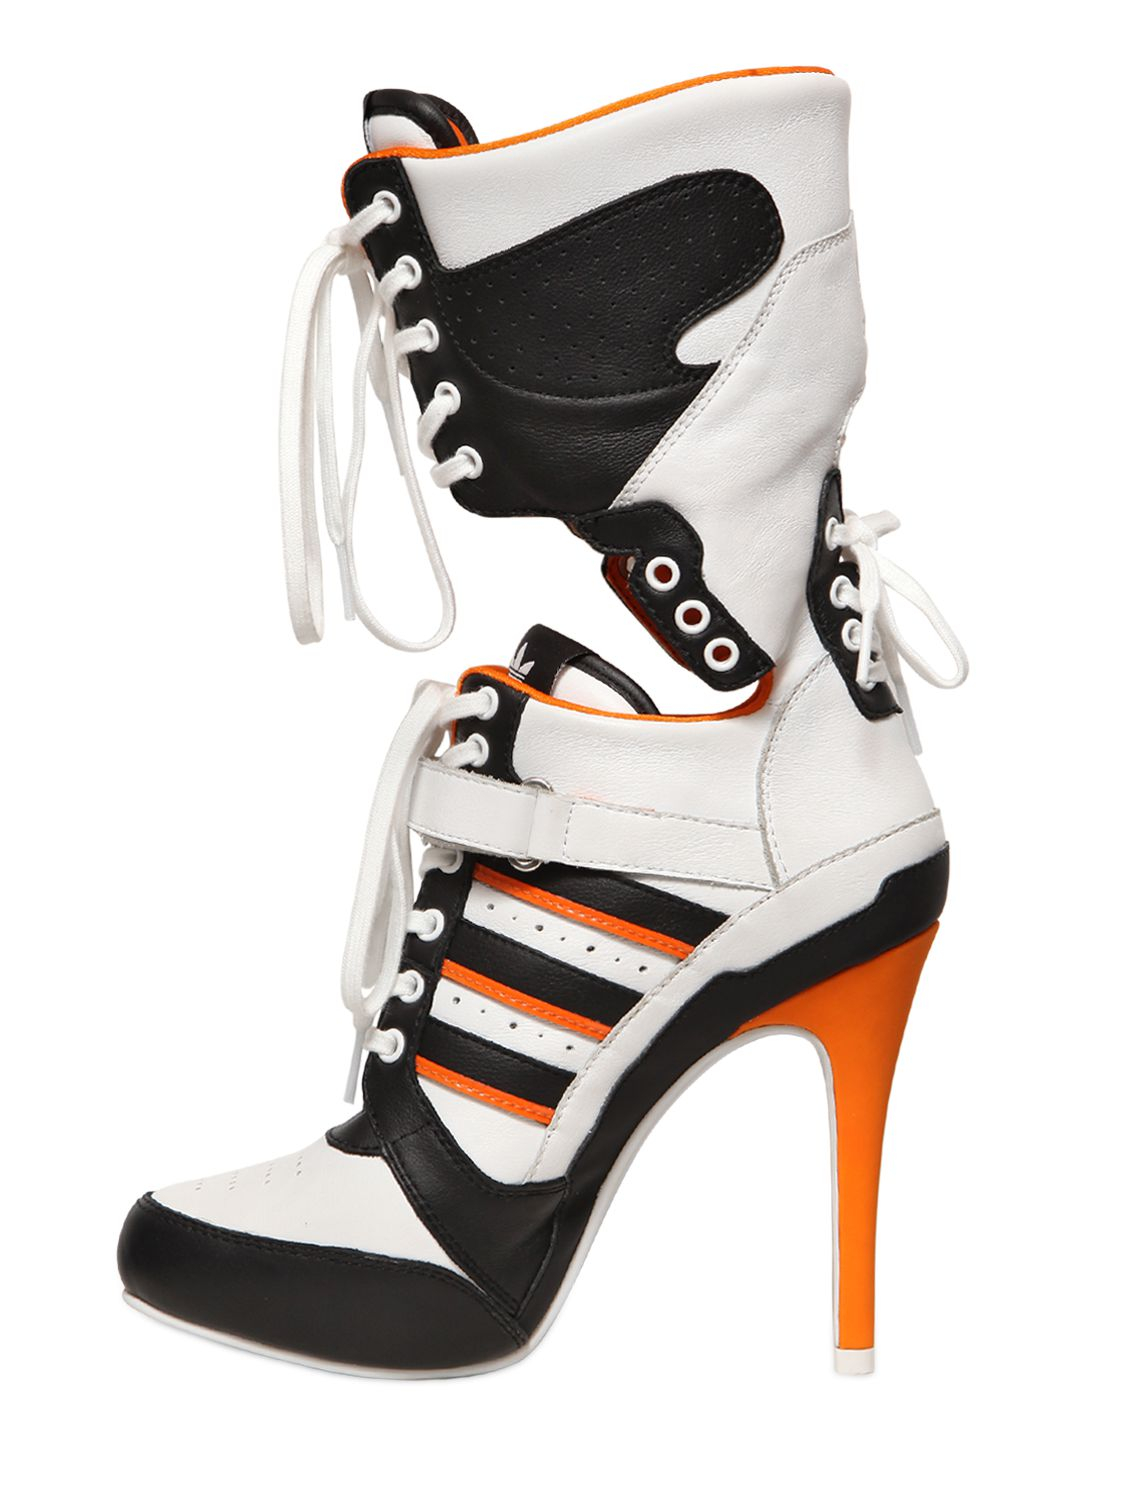 Jeremy Scott for adidas 130mm Js High Heel Leather Boots in White/Black